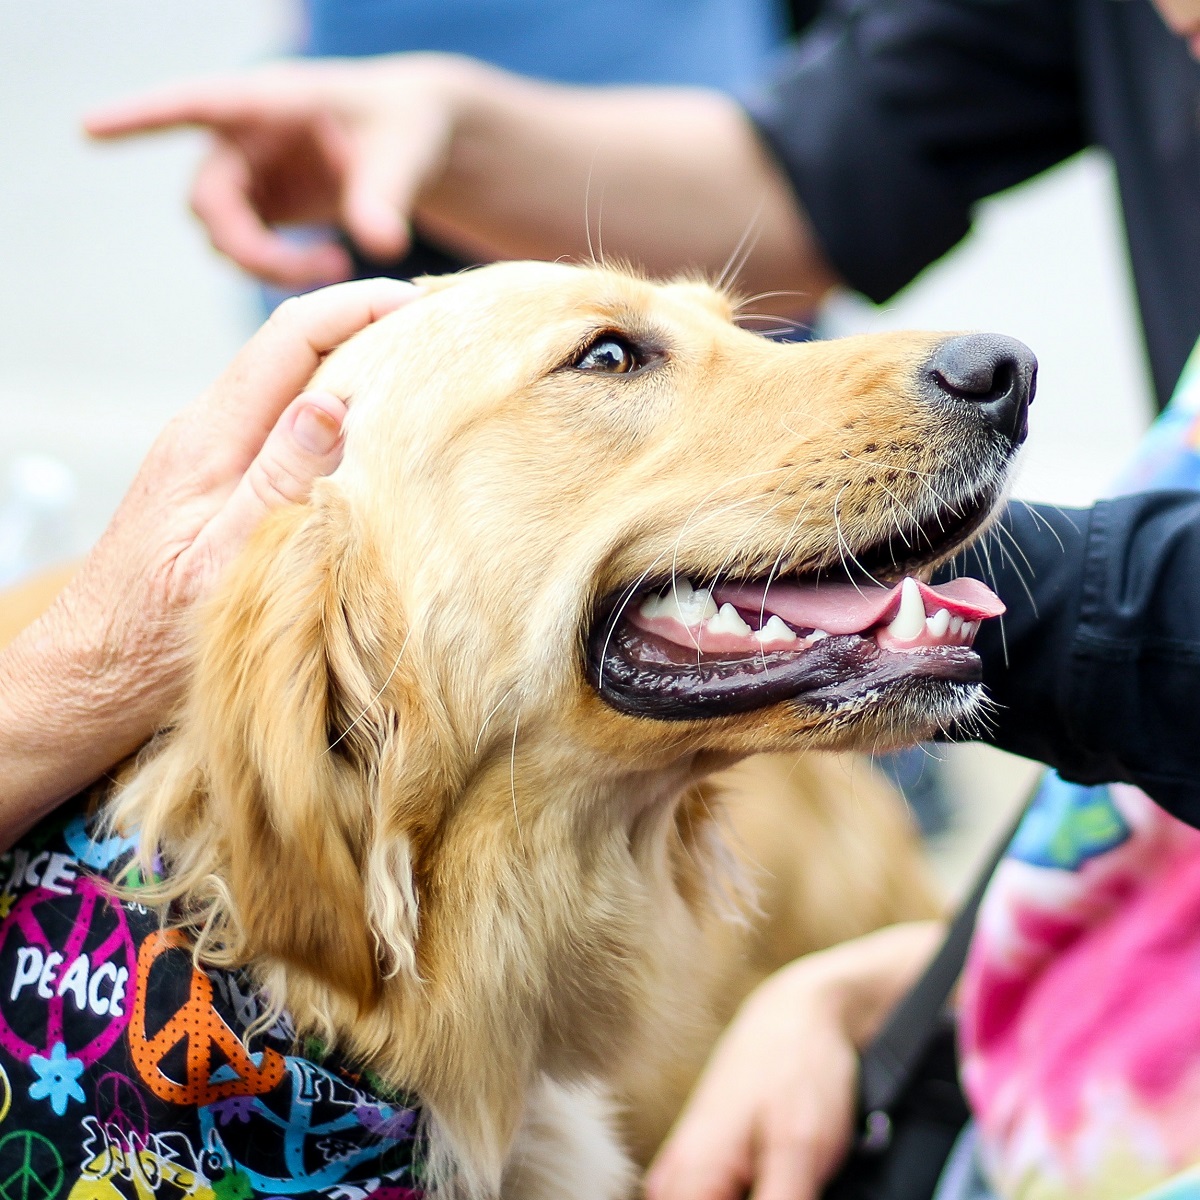 golden-retriever-dog-wearing-party-bandana-and-being-pet=by-a-hand